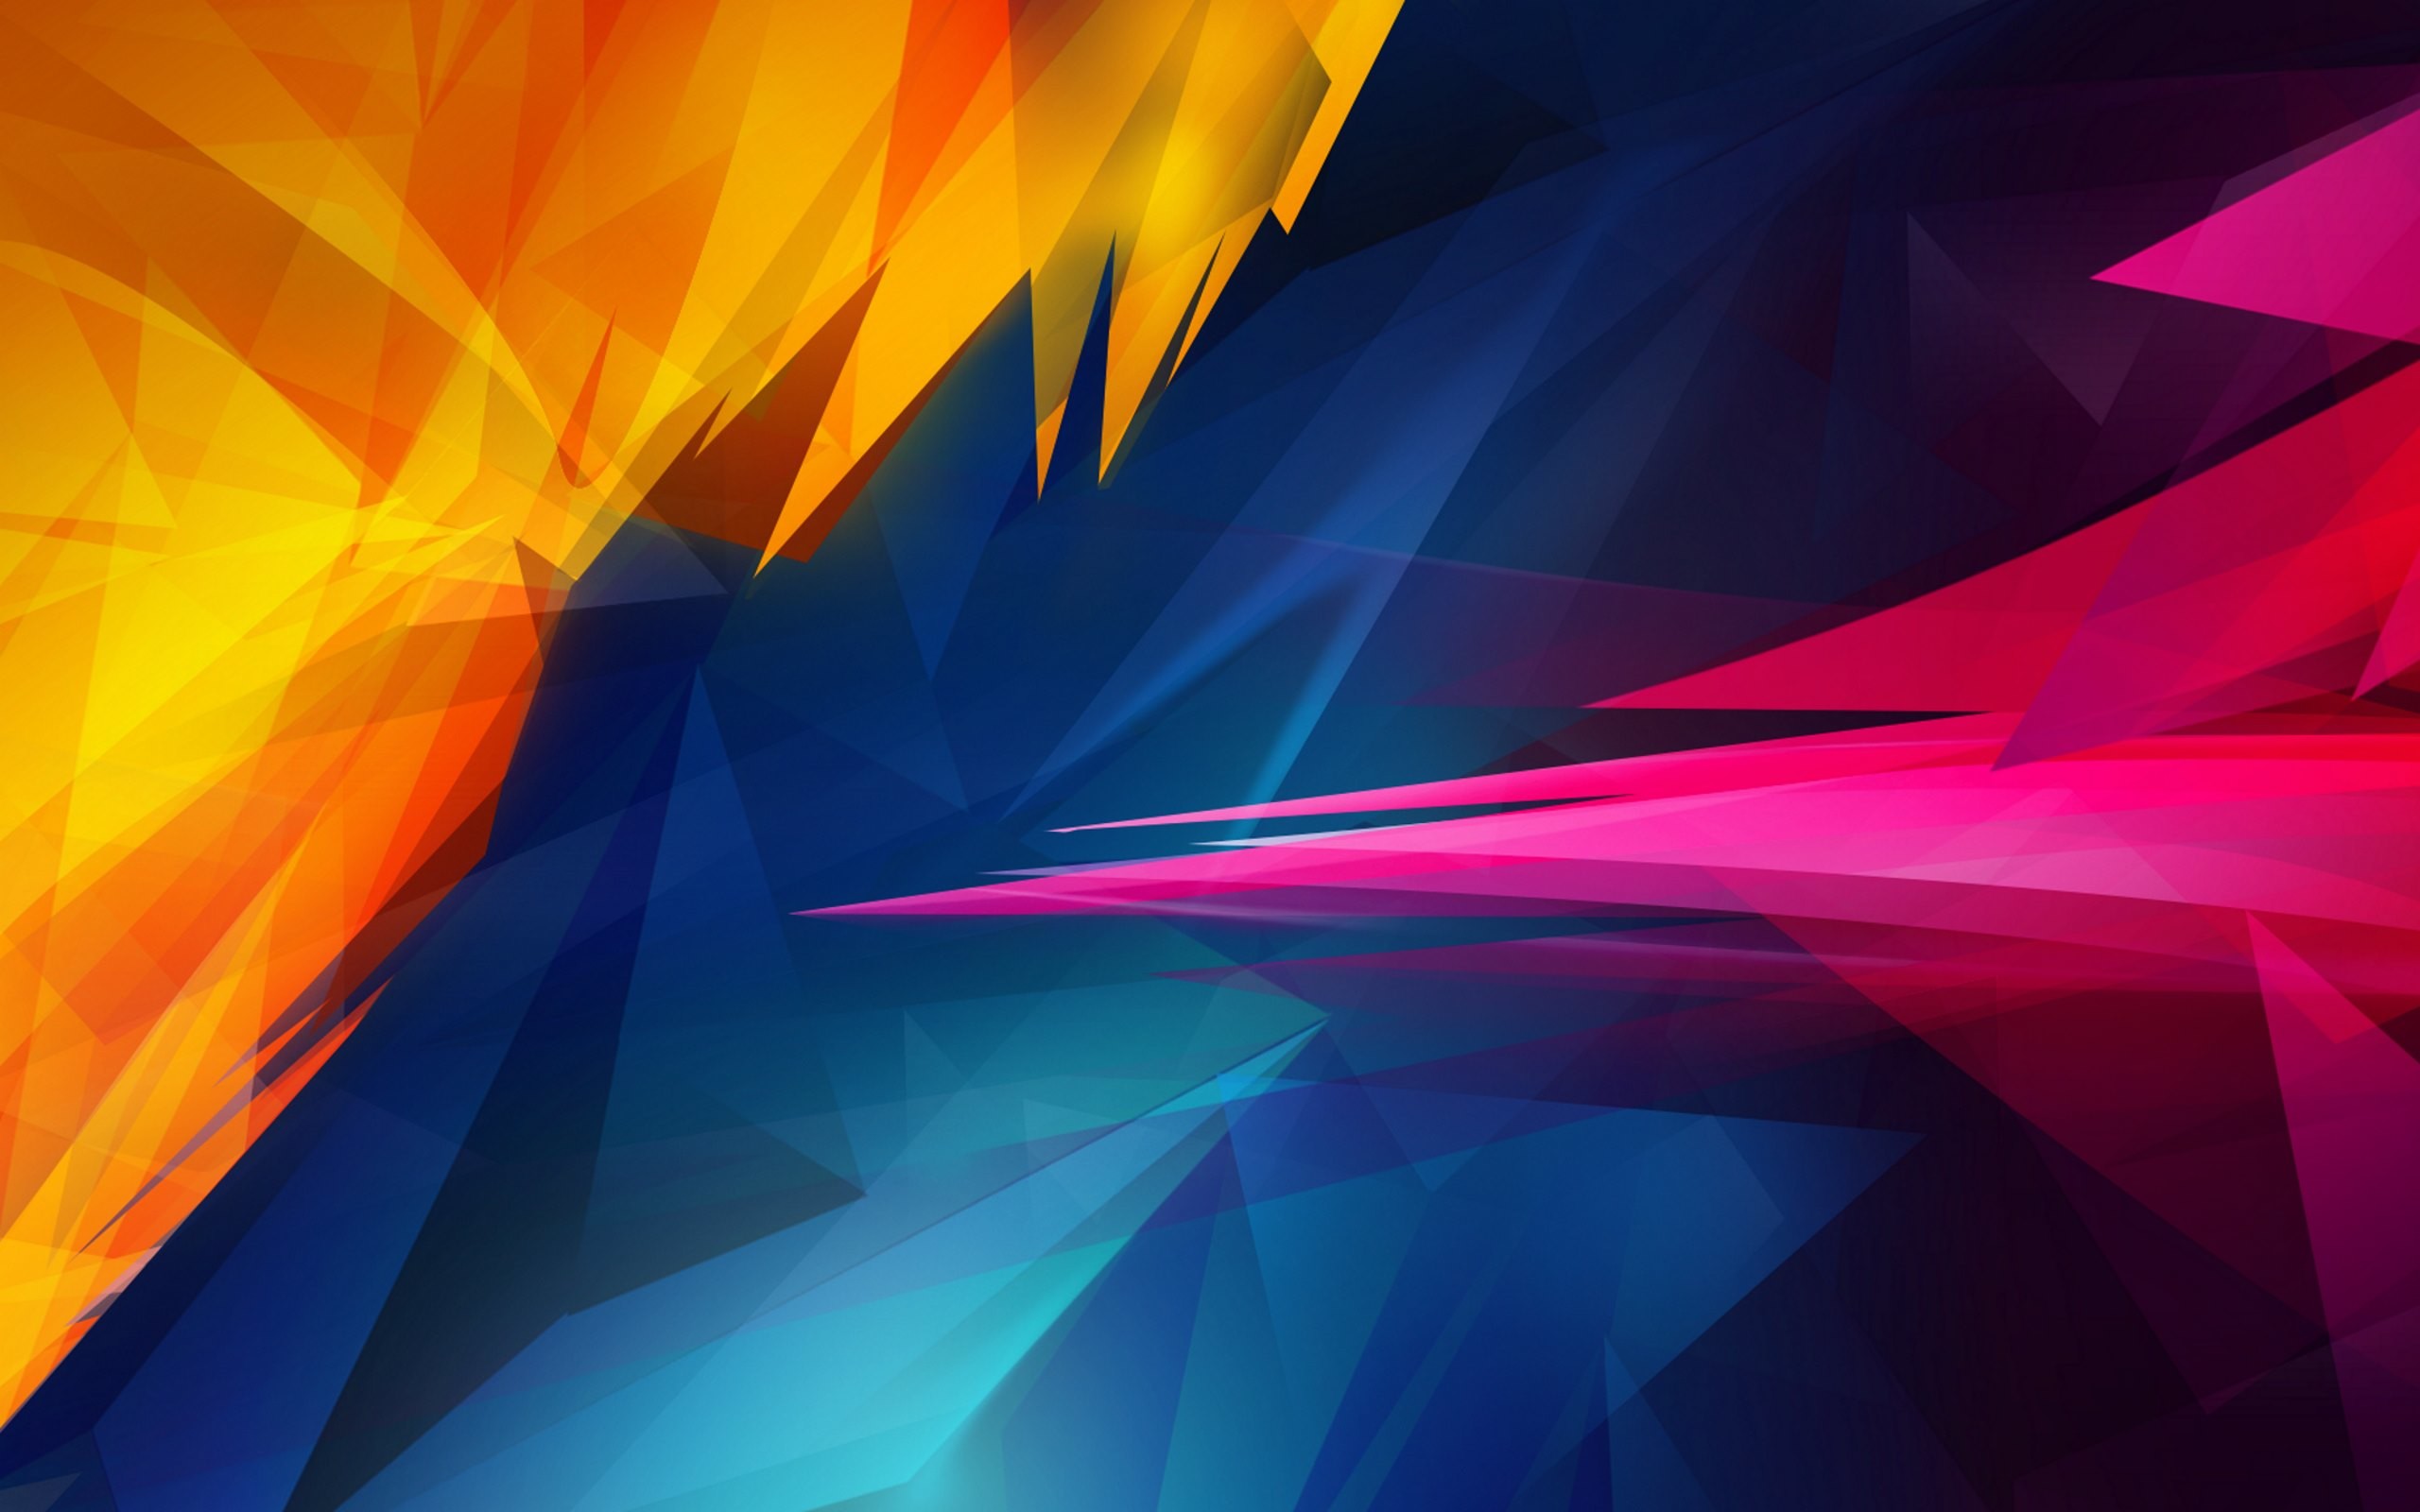 2560x1600 These 2 abstract wallpapers are featured with permission from portfolio of  talented graphic artist - Anthony Sae-Jang Â· Download the abstract sharp  shapes ...